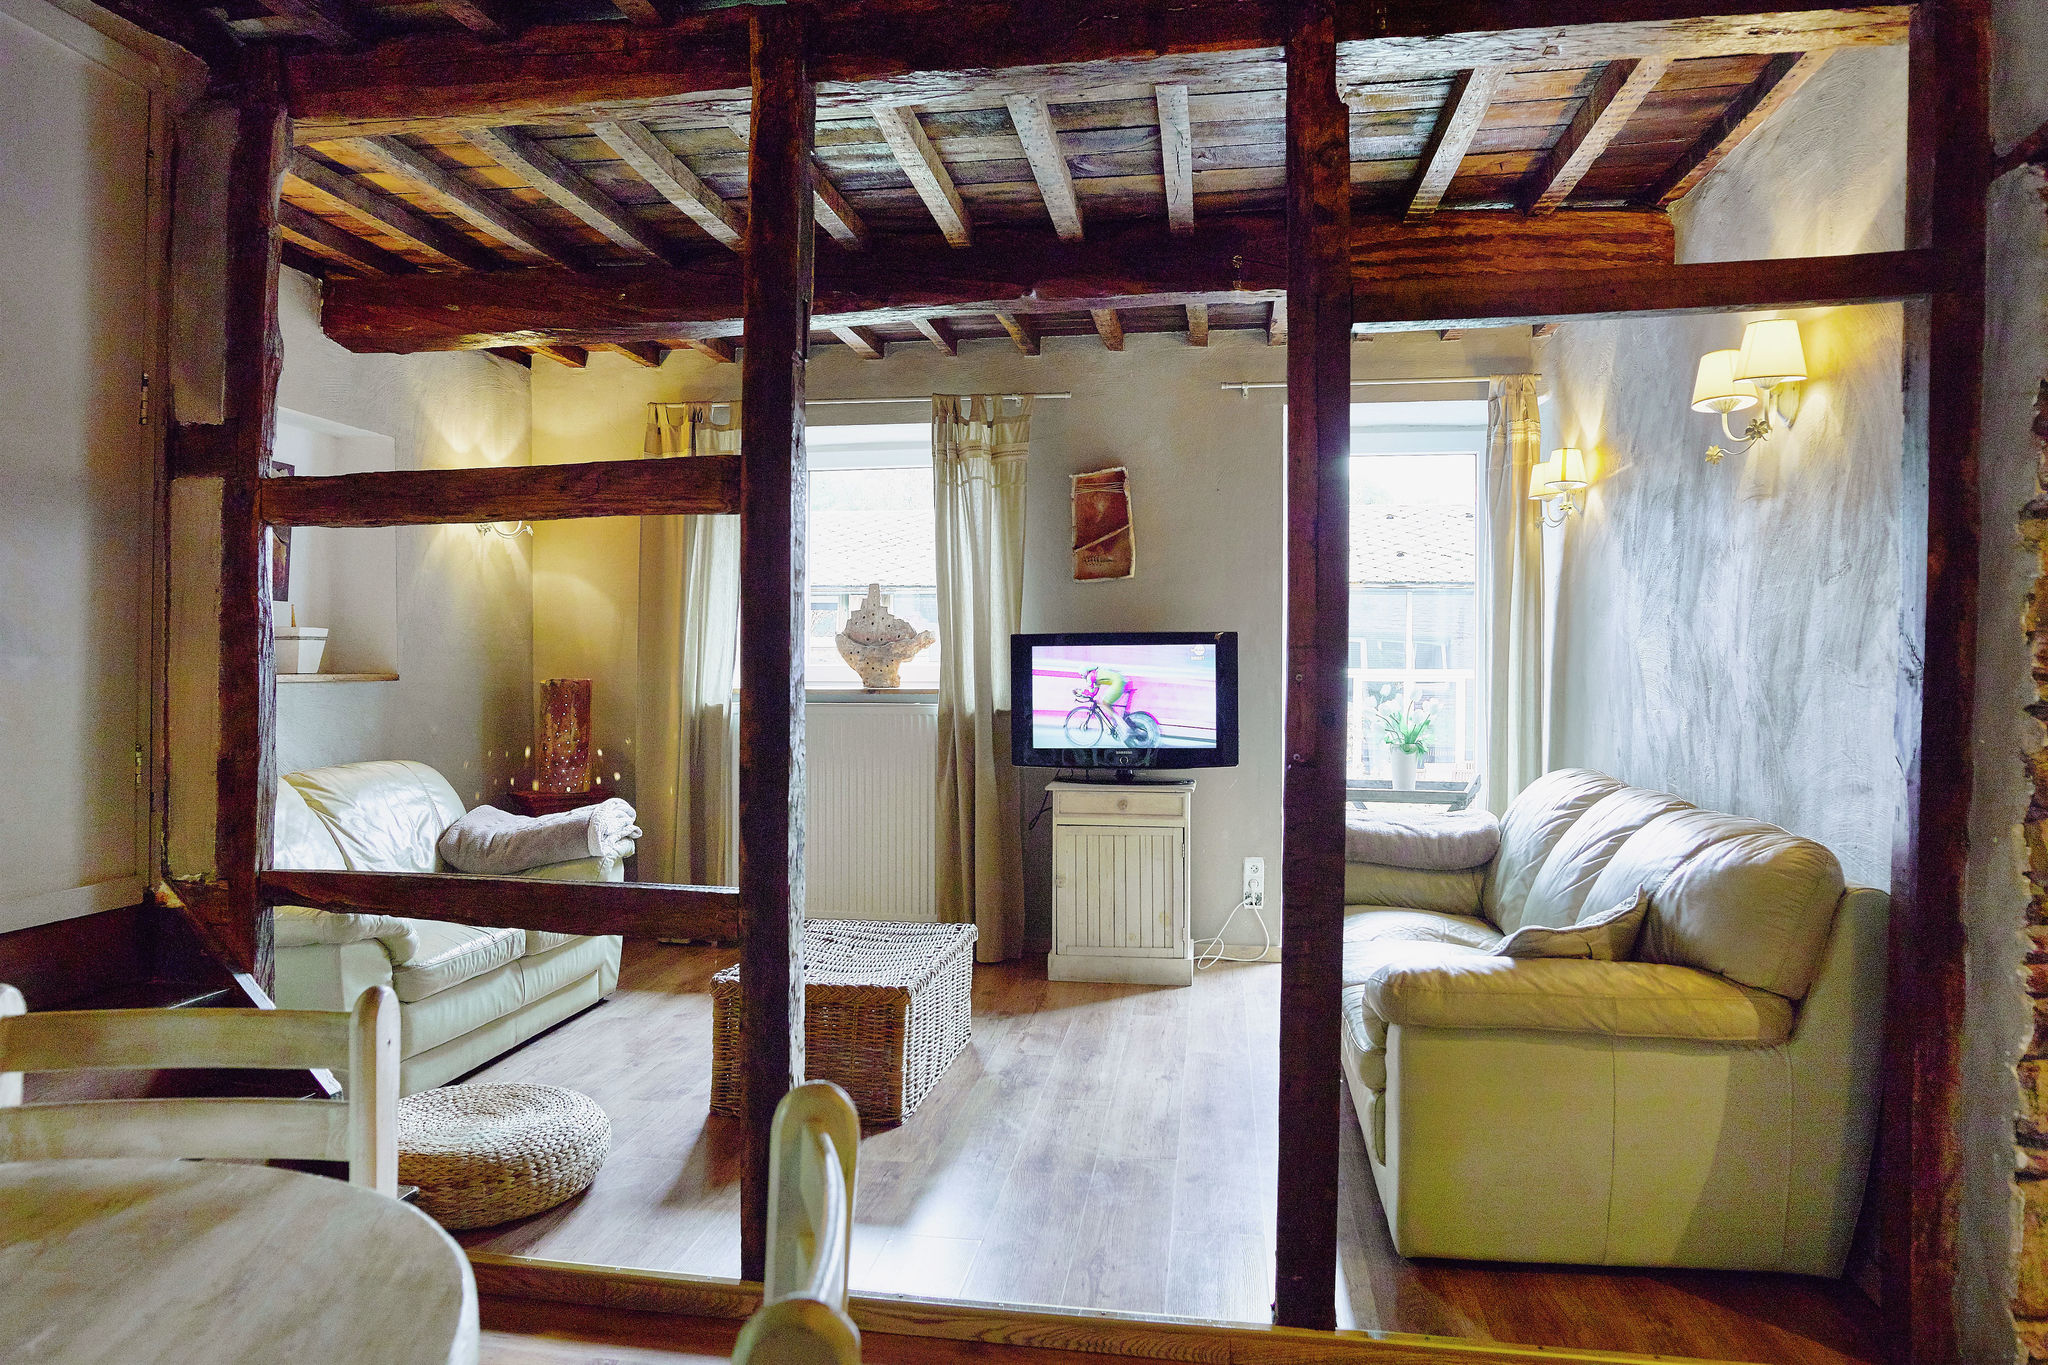 Luxurious, beautiful holiday villa for a large group of people with an indoor pool and sauna